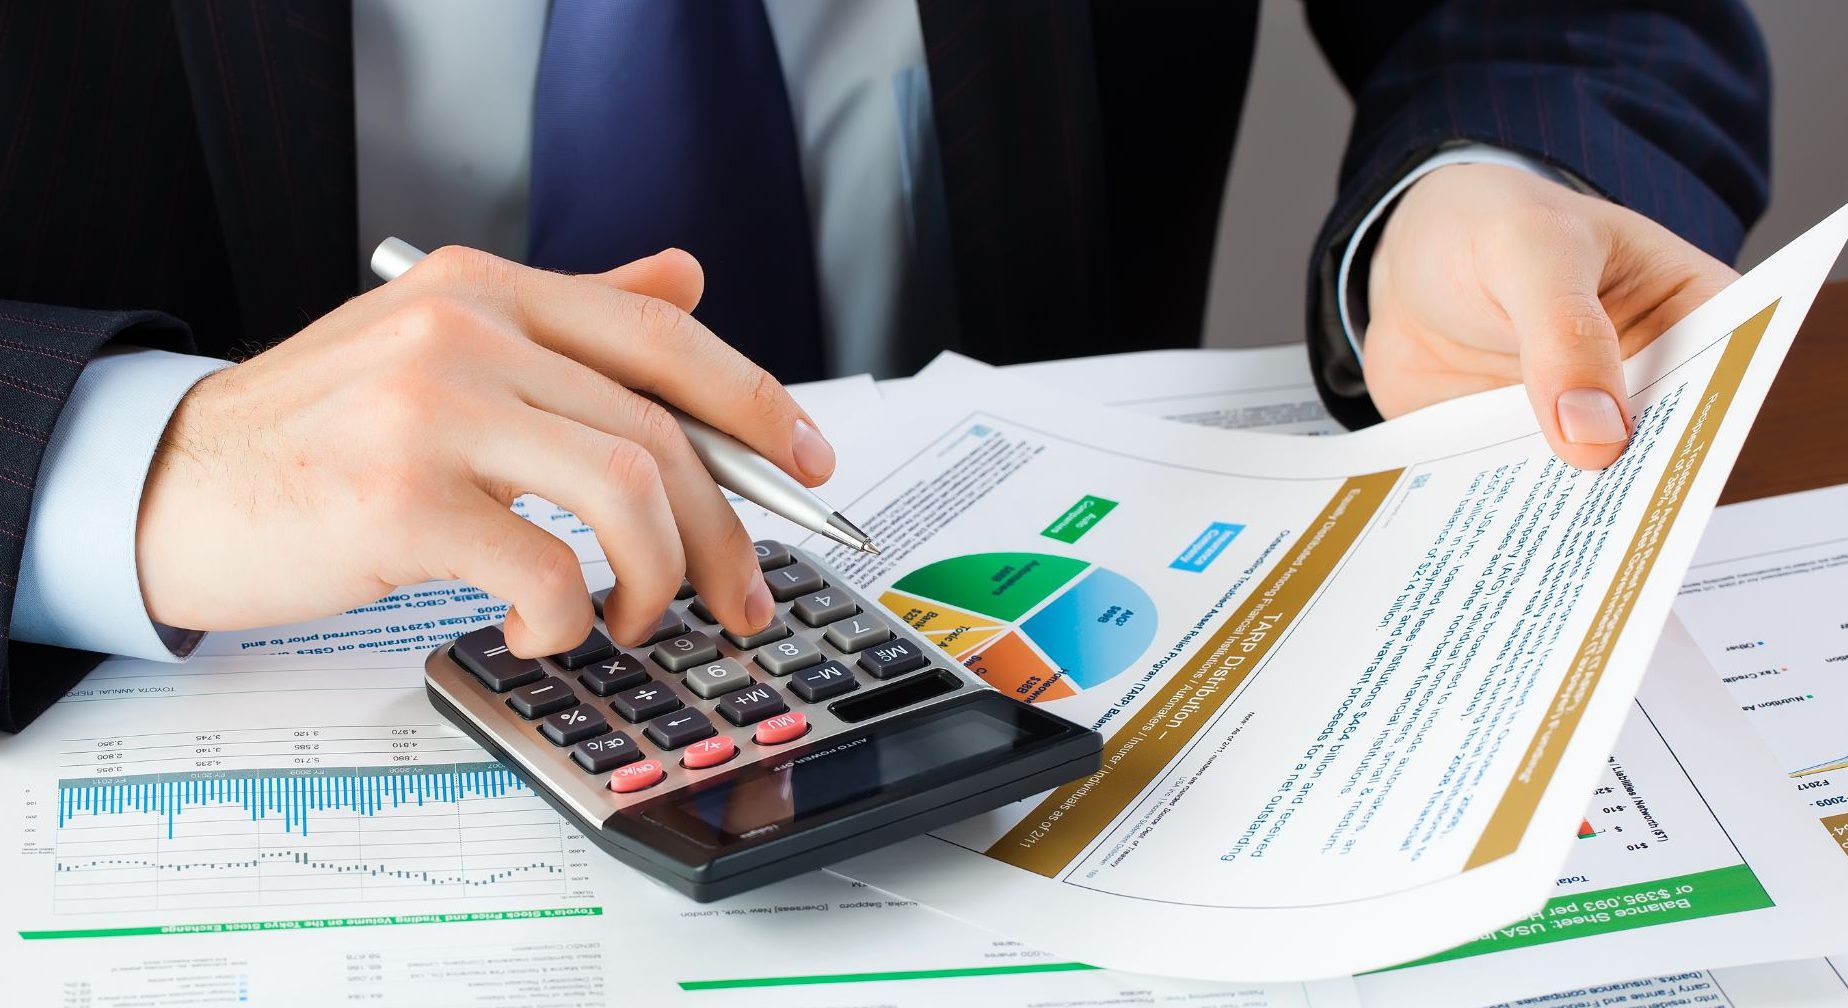 Global Accounting Services Market Growth Analysis And Indications – Includes Accounting Services Market Share